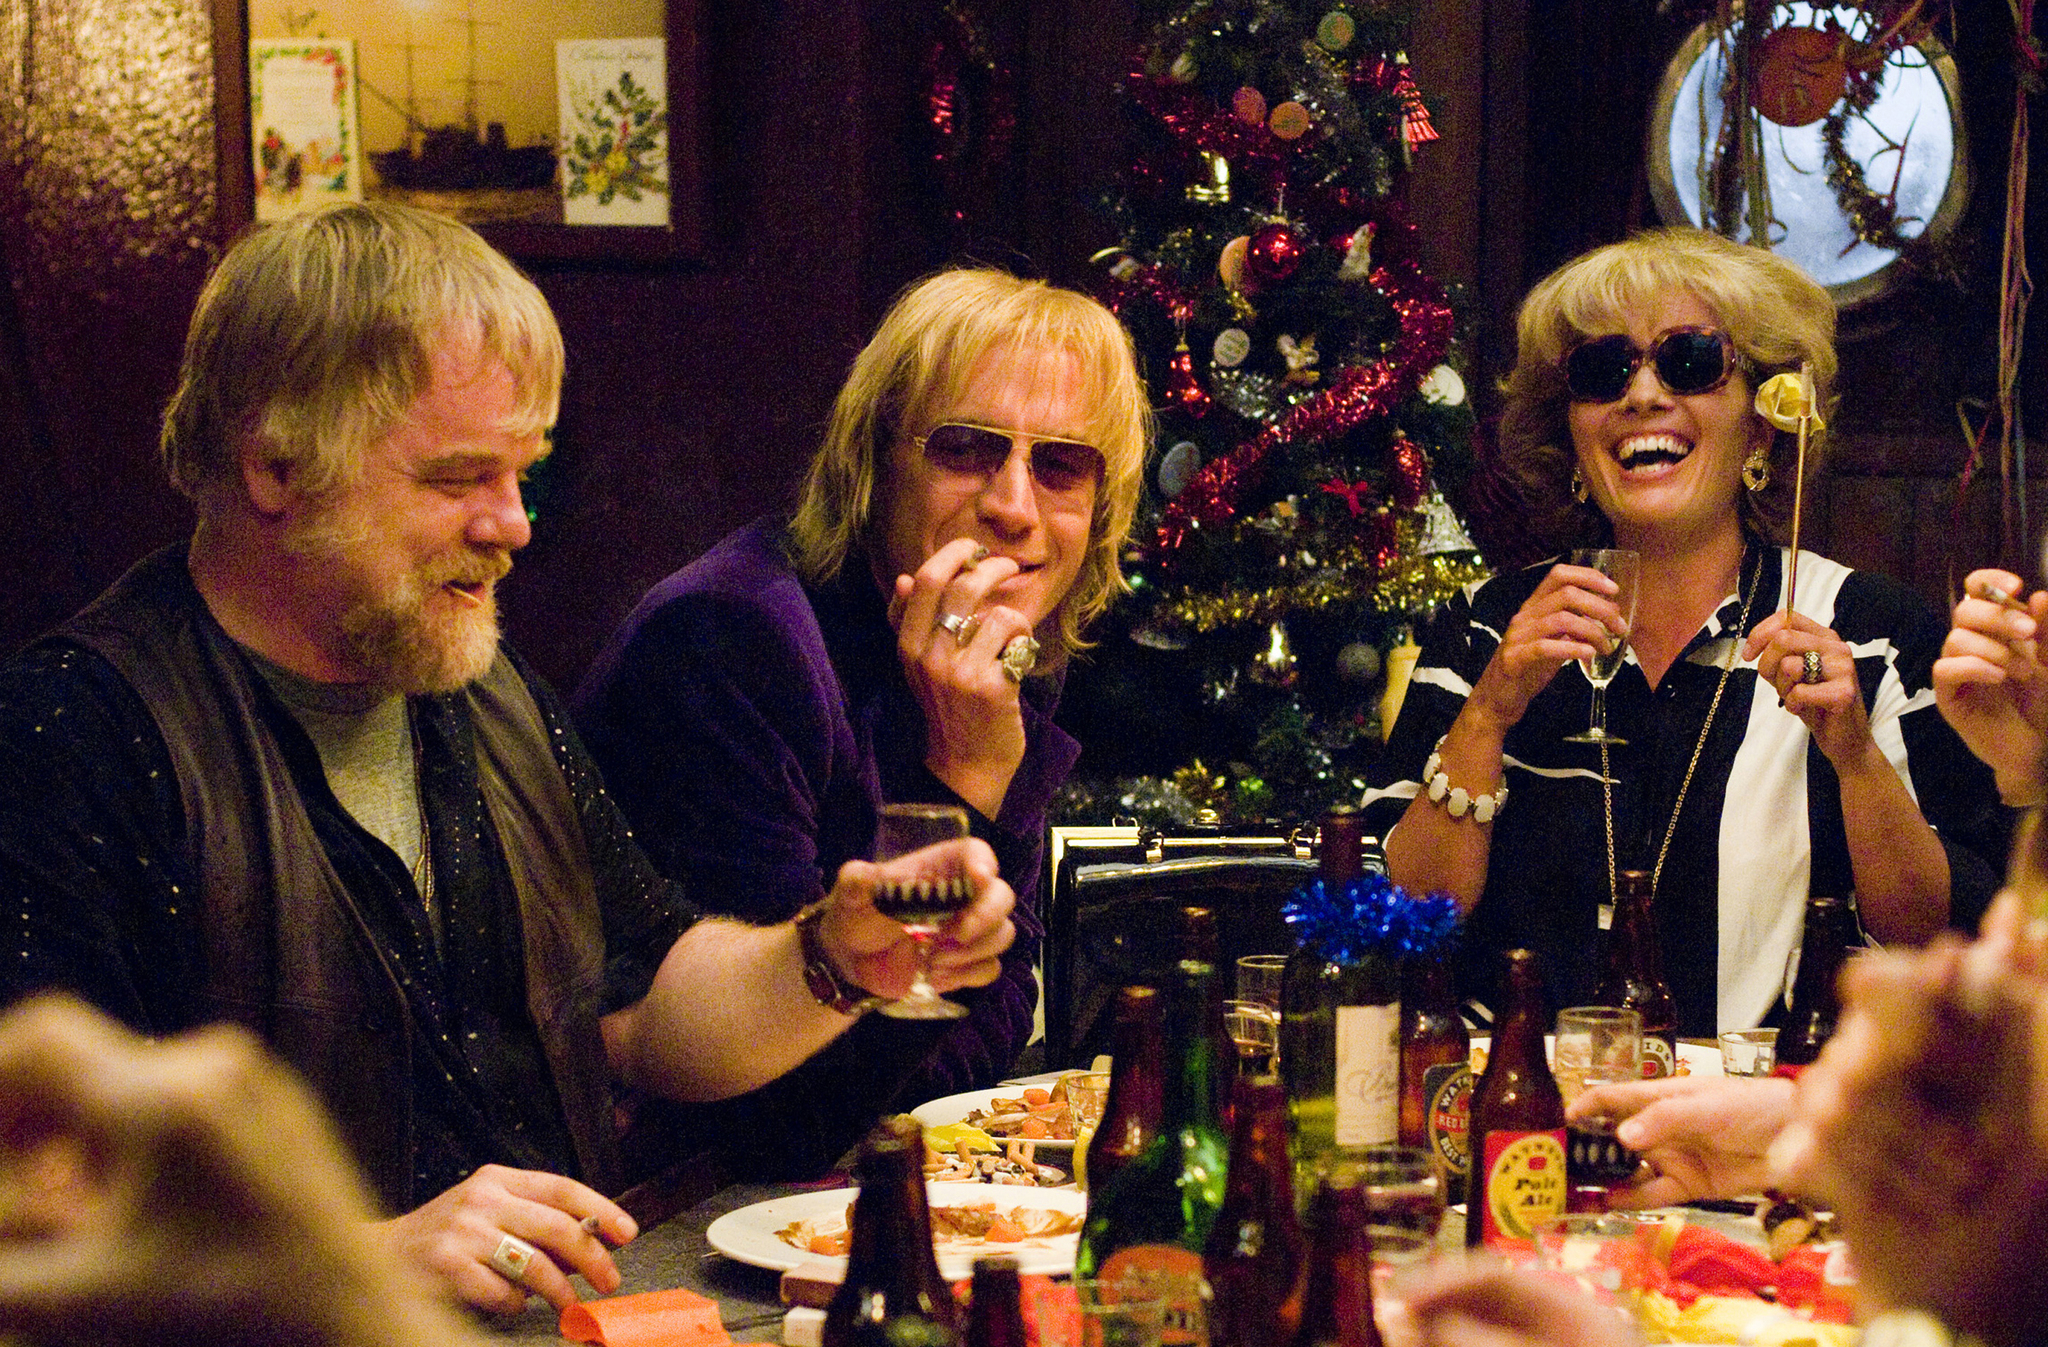 Philip Seymour Hoffman, Emma Thompson and Rhys Ifans at event of The Boat That Rocked (2009)